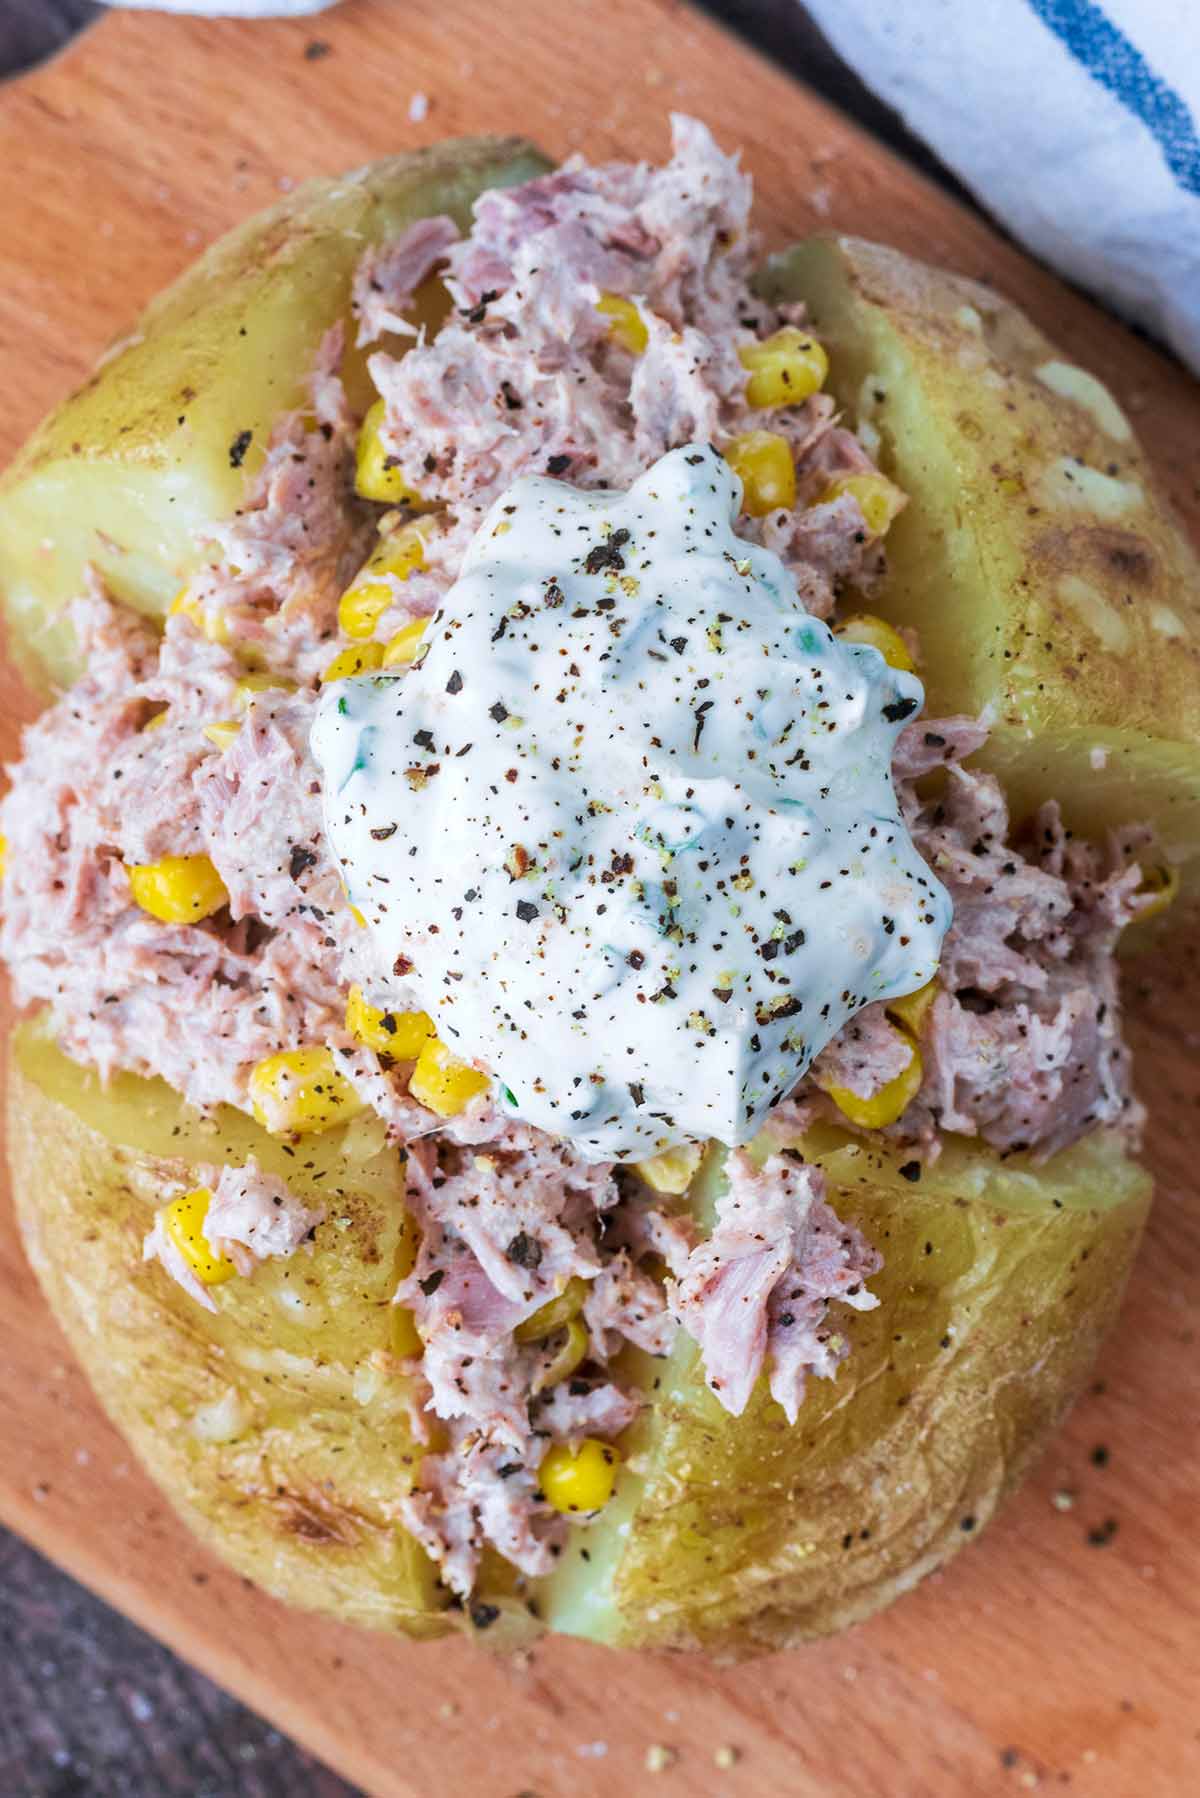 A dollop of sour cream on top of a tuna mayonnaise filled baked potato.